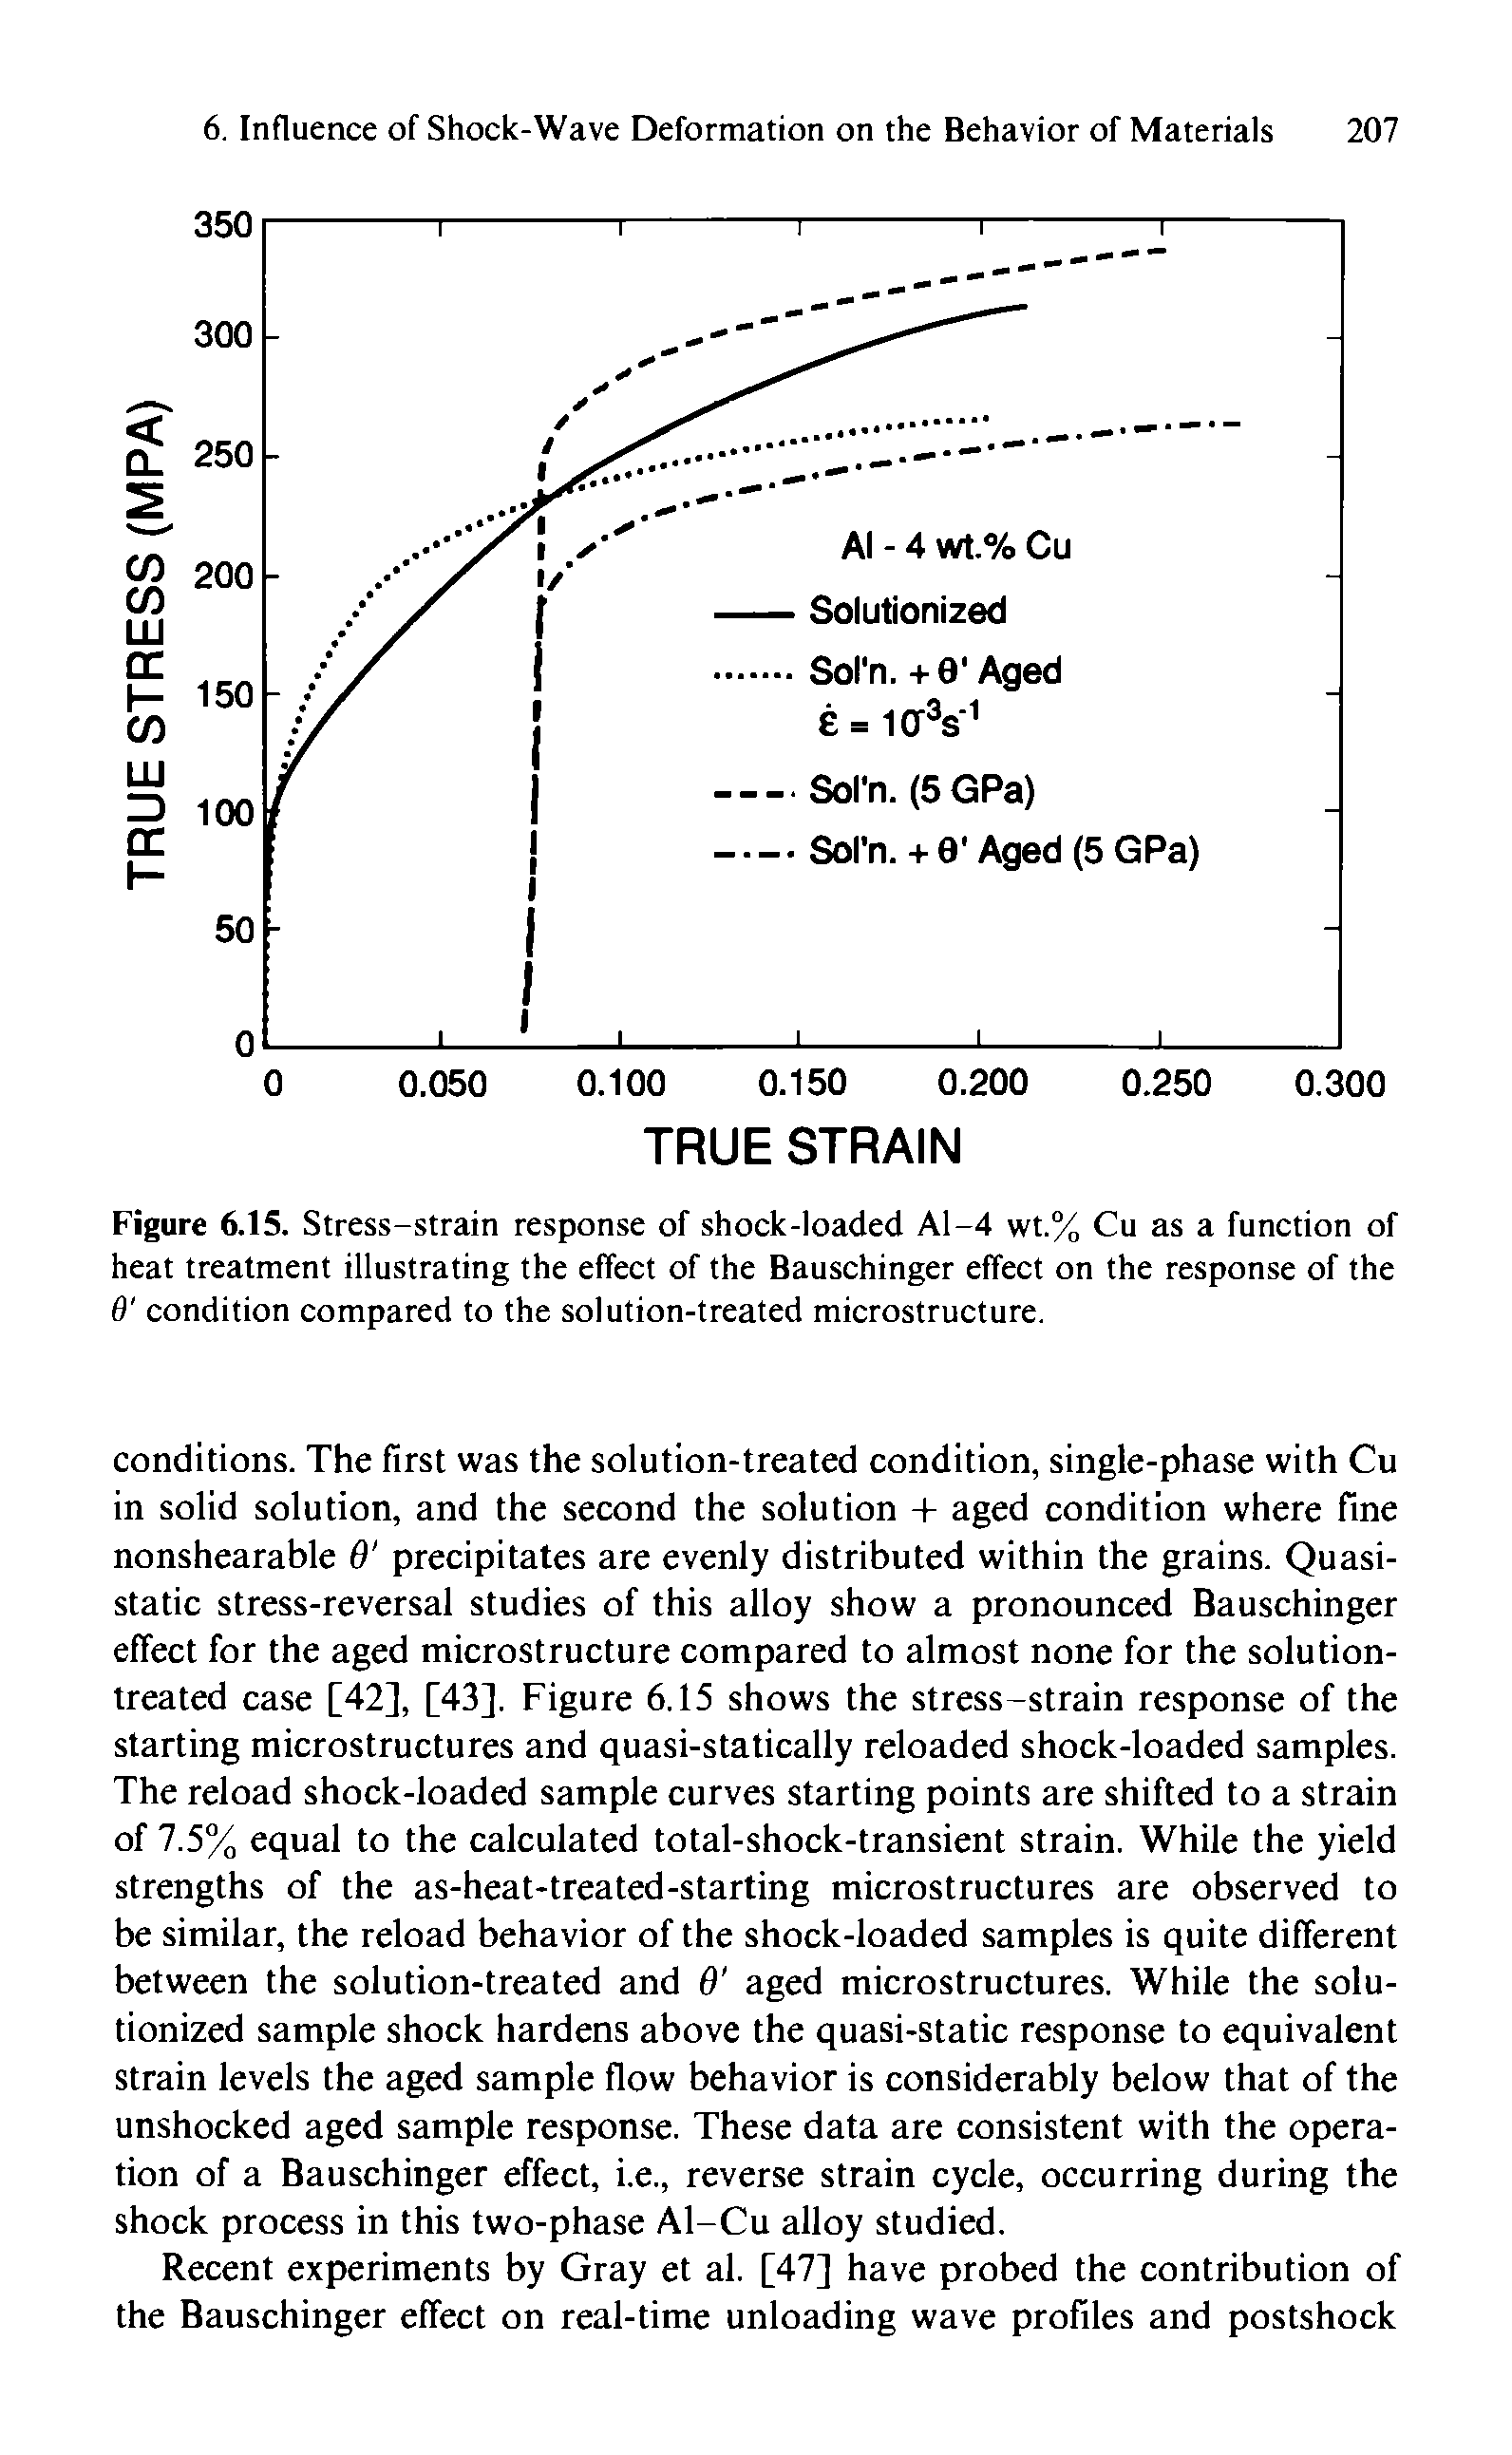 Figure 6.15. Stress-strain response of shock-loaded Al-4 wt.% Cu as a function of heat treatment illustrating the effect of the Bauschinger effect on the response of the 6 condition compared to the solution-treated microstructure.